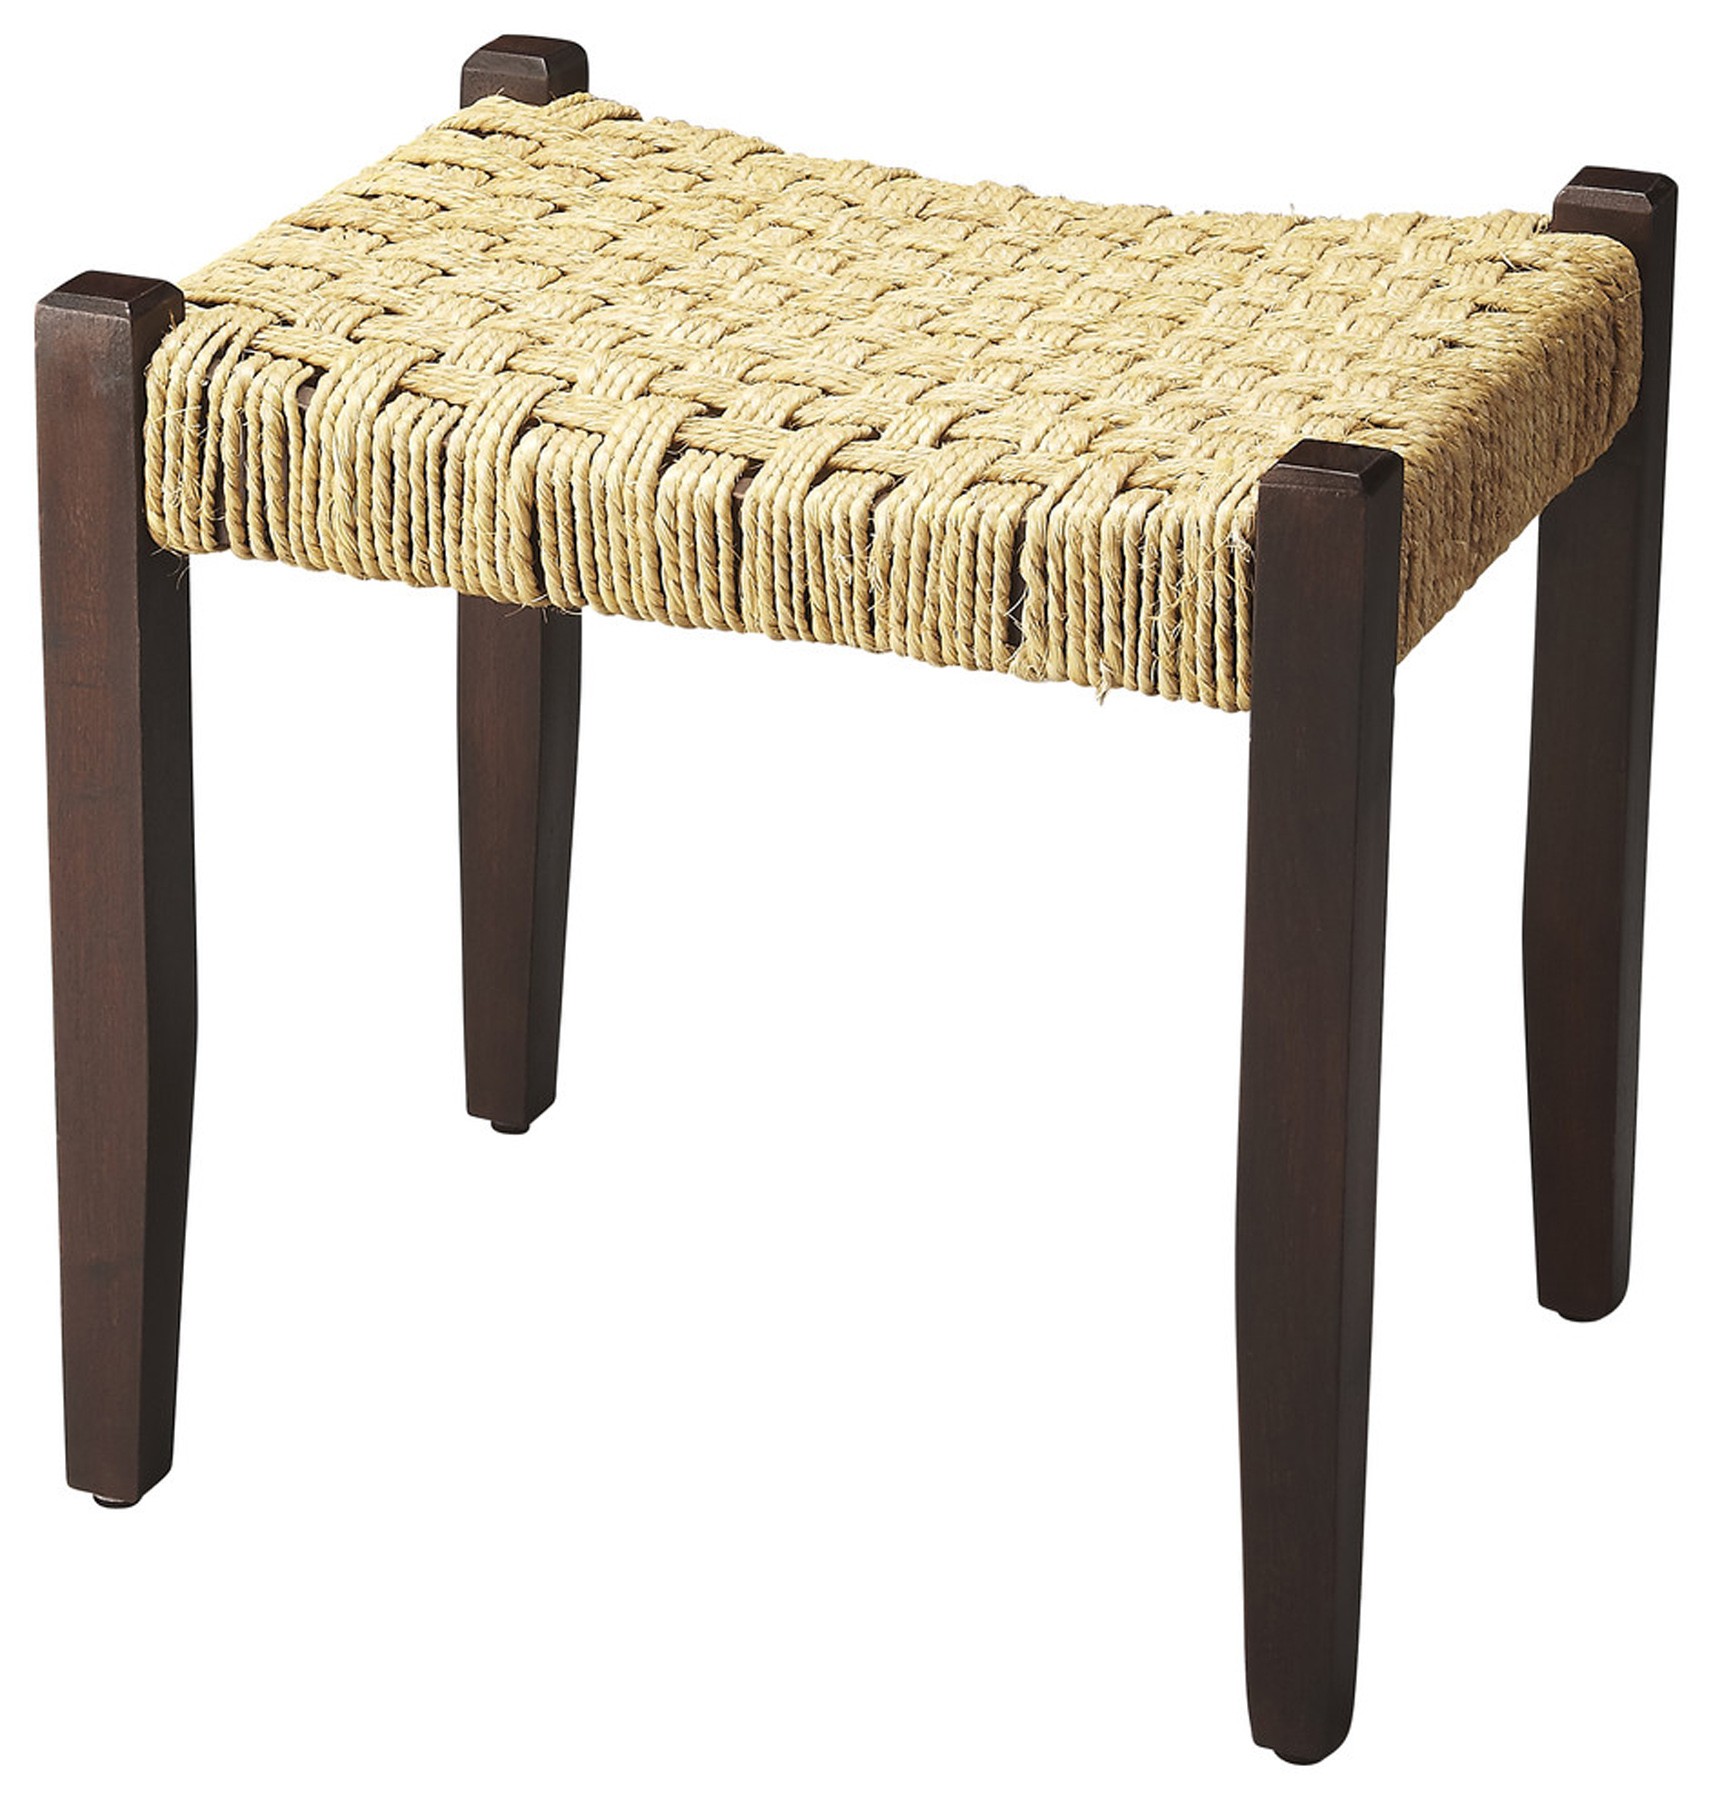 Solid Wood And Woven Jute Stool